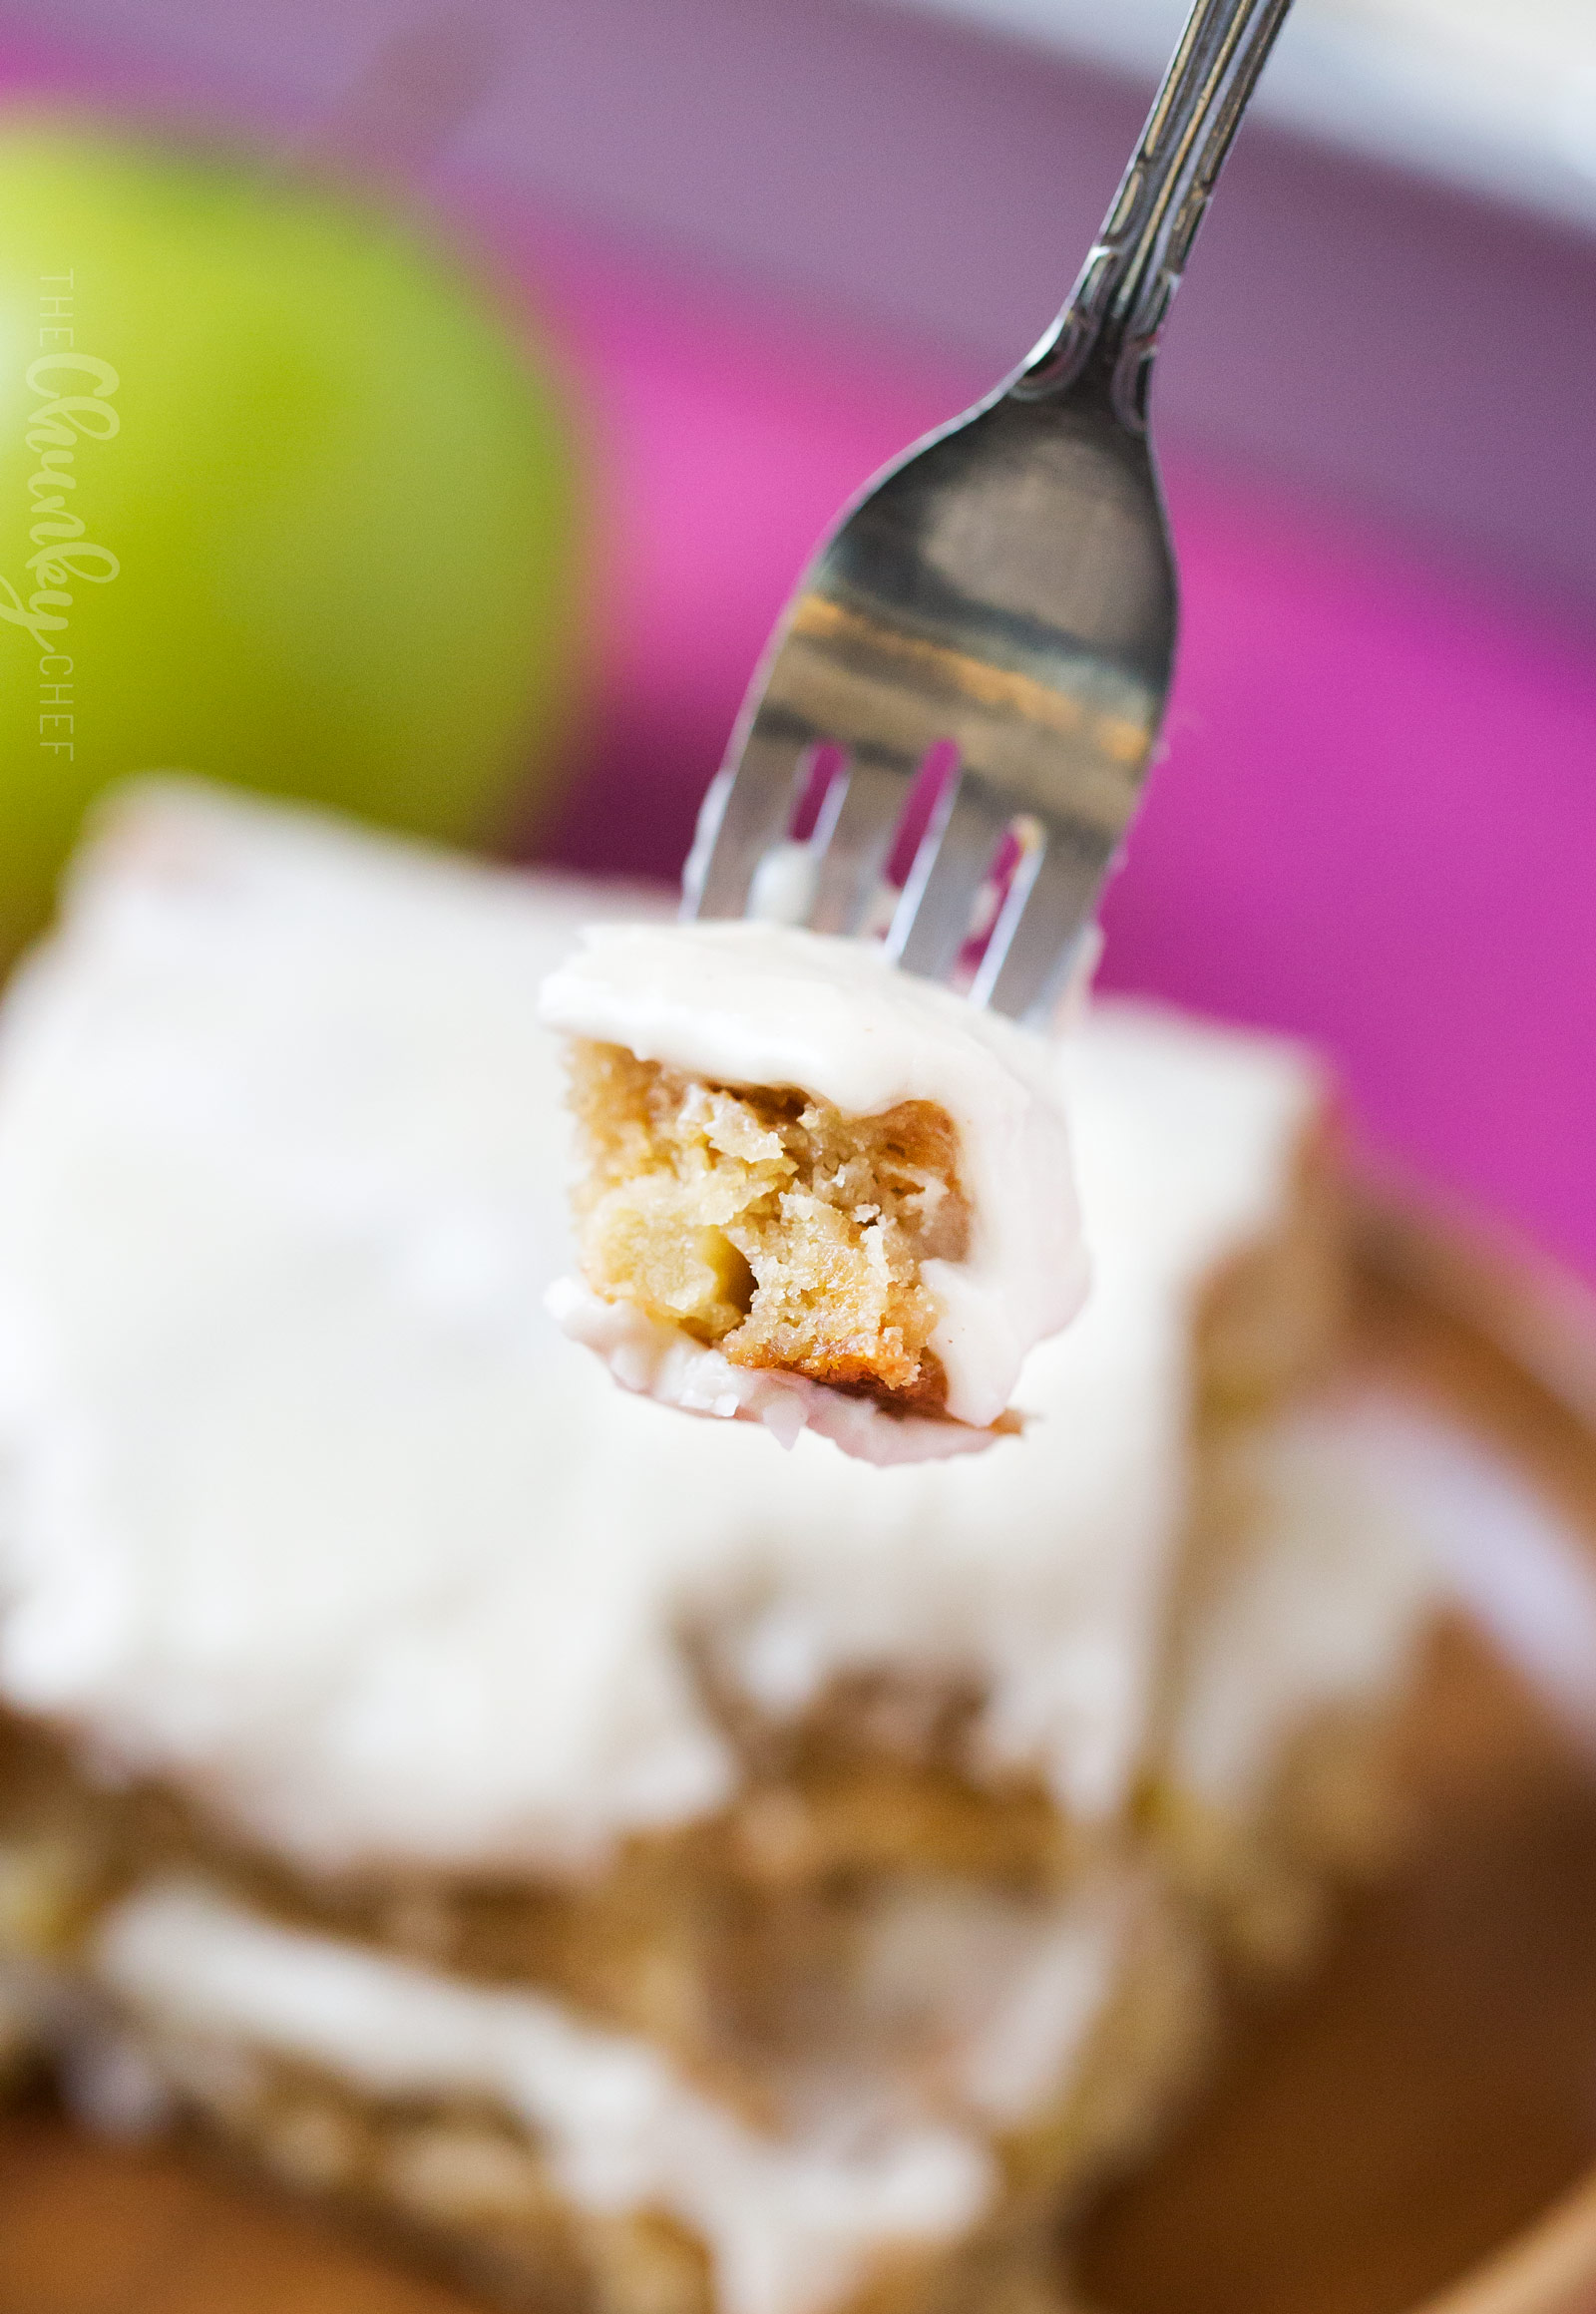 Maple Apple Blondie Recipe | These melt-in-your-mouth blondie bars made with crisp apples, maple syrup and cinnamon are a classic Fall dessert!  Topped with a maple cinnamon frosting, they're a must-try! | http://thechunkychef.com | blondie | apple | maple | bars | dessert | Fall | frosting